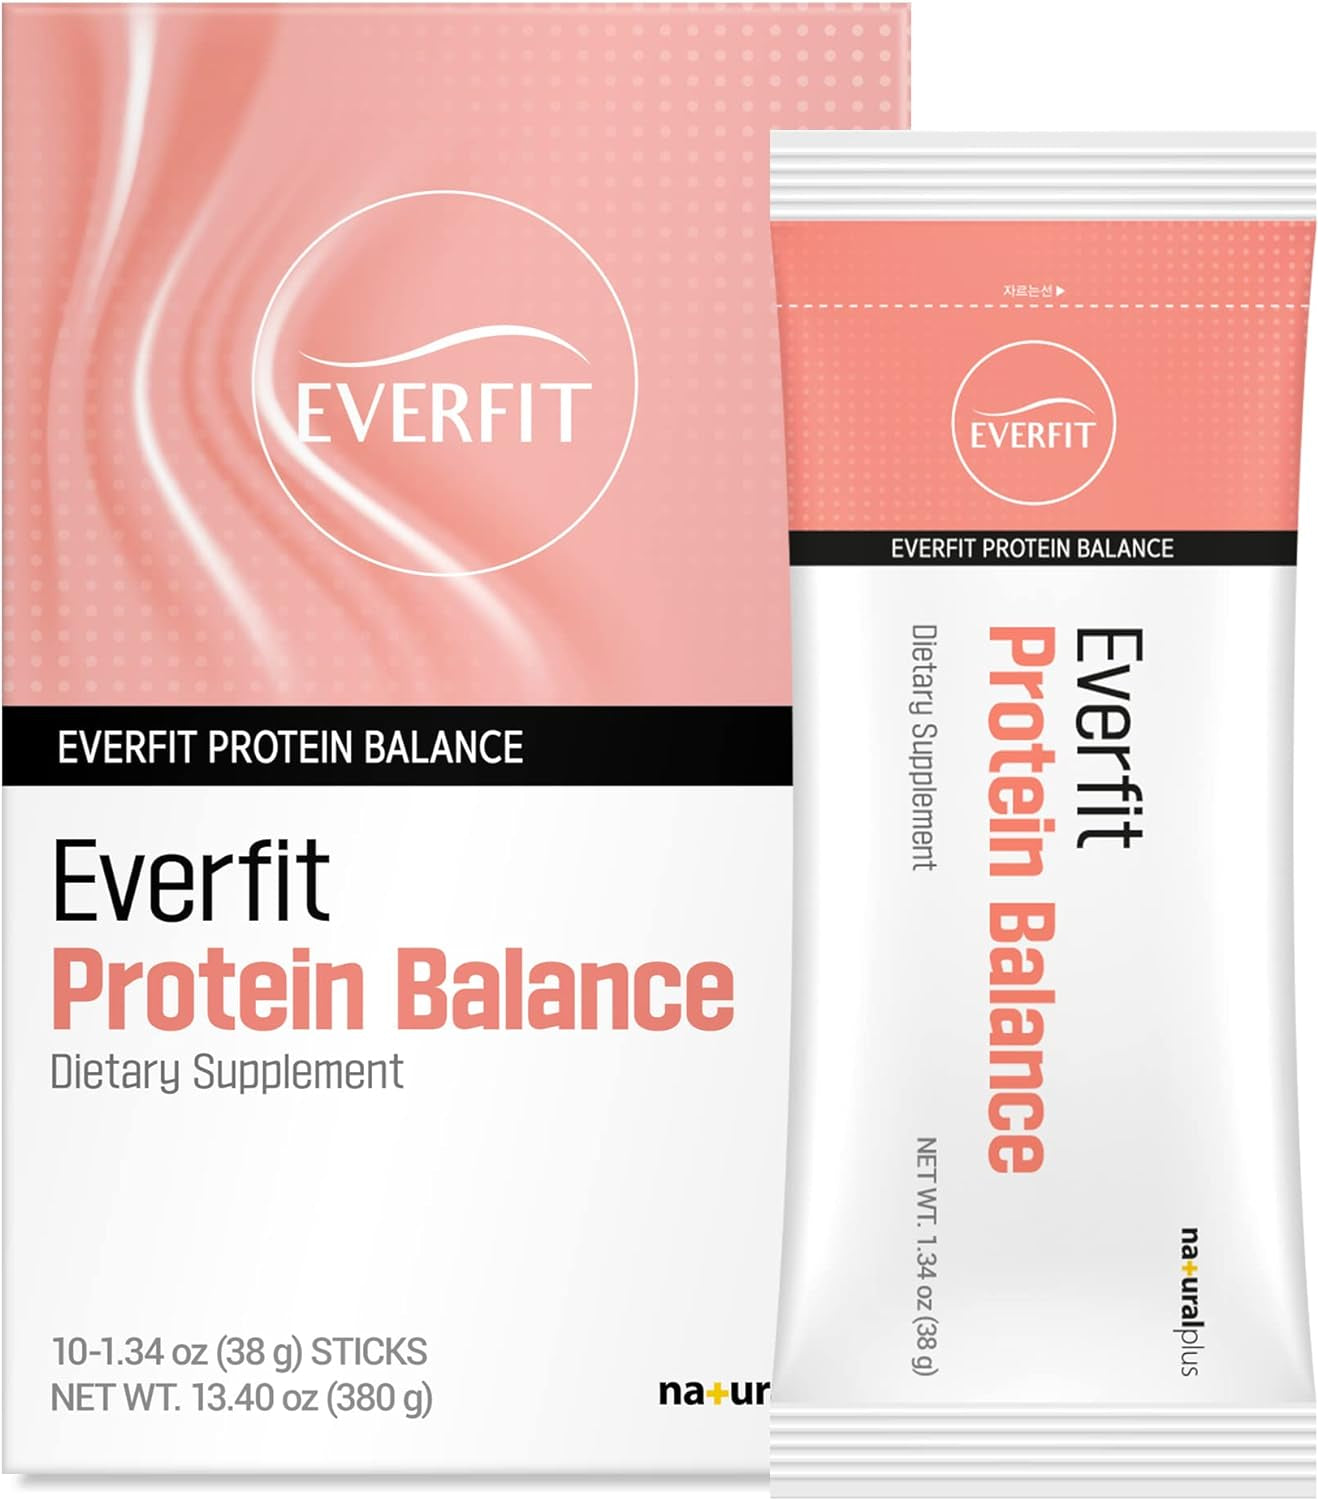 NATURALPLUS Everfit Protein Balance Powder for Total Body Fit & Muscle Strengthening, Protein Mix with HCA from Garcinia Cambogia, FOS, Vitamin D, B6, Calcium, Zinc, Biotin, 10 Portable Packets, 380G